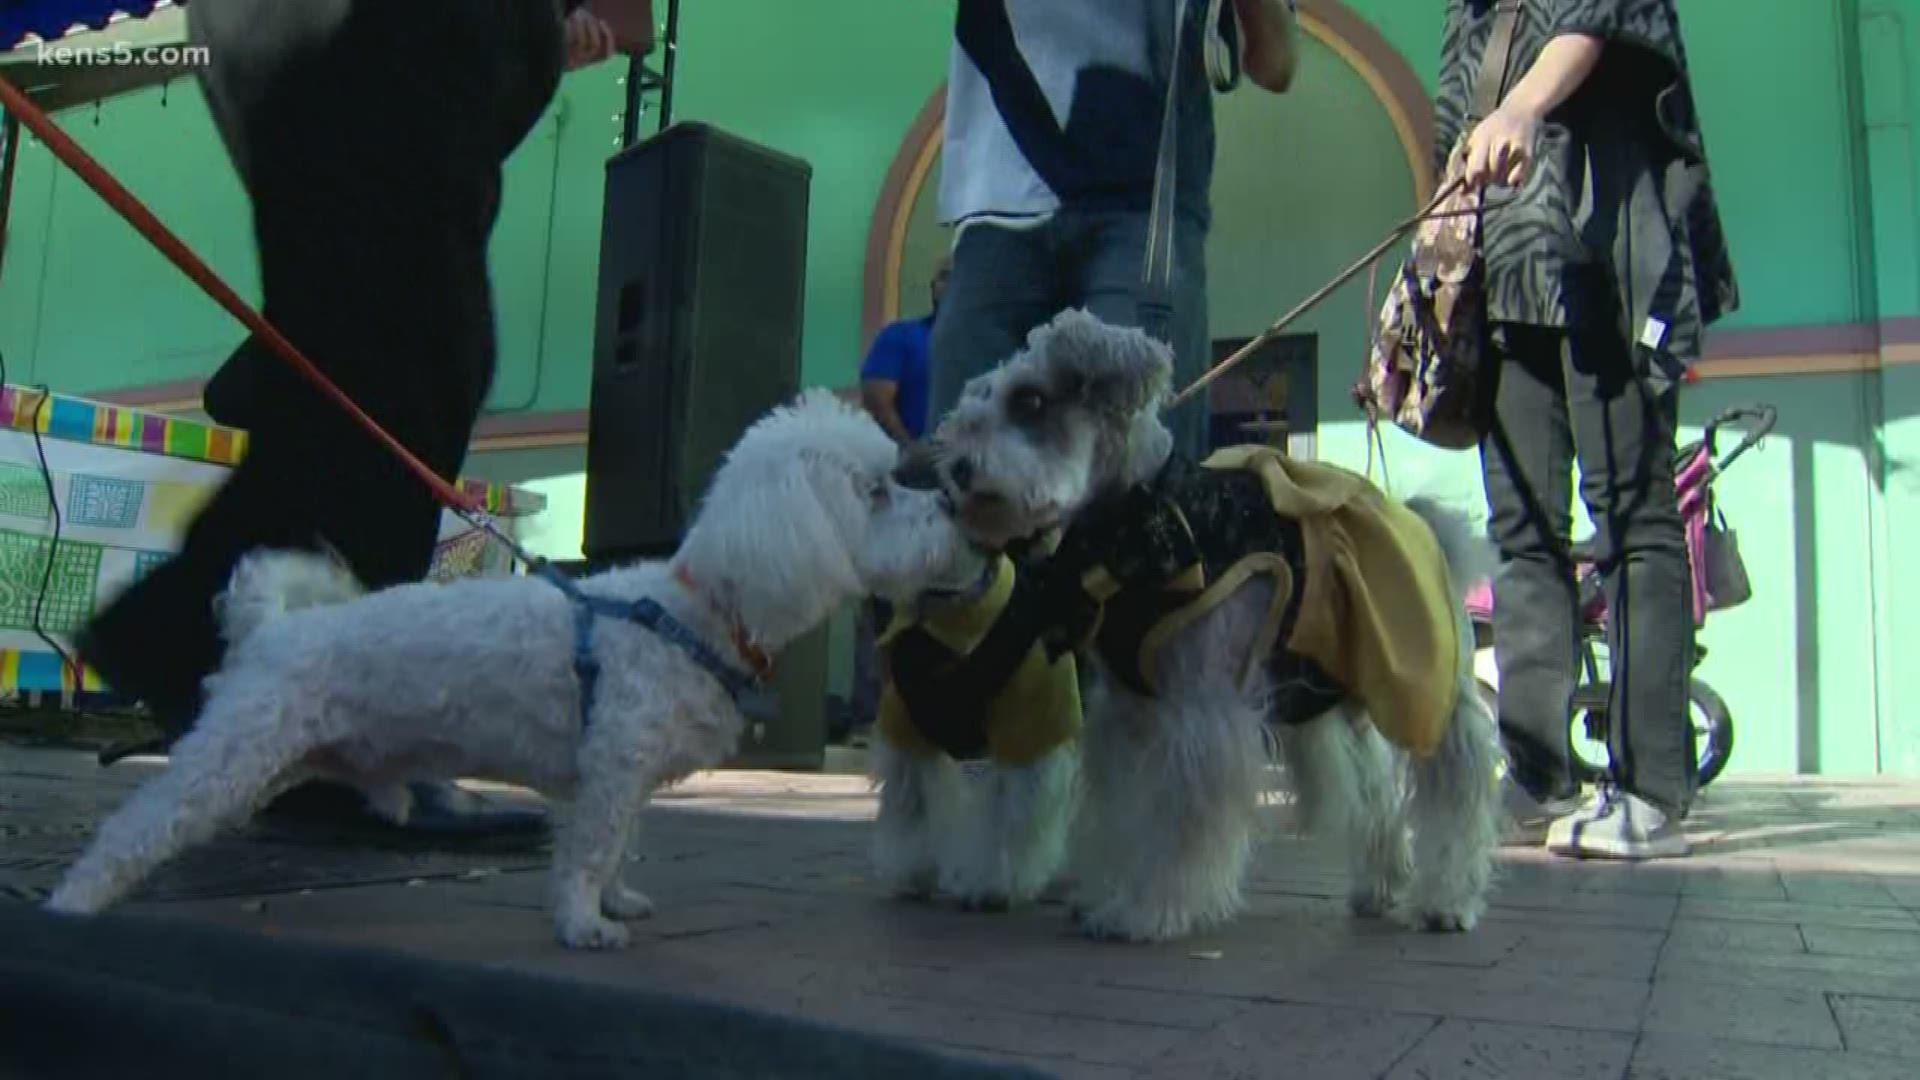 The Blessing of the Animals event took place at Market Square in San Antonio this weekend. Some wanted to make sure their four-legged friends were blessed as we head into a new year.